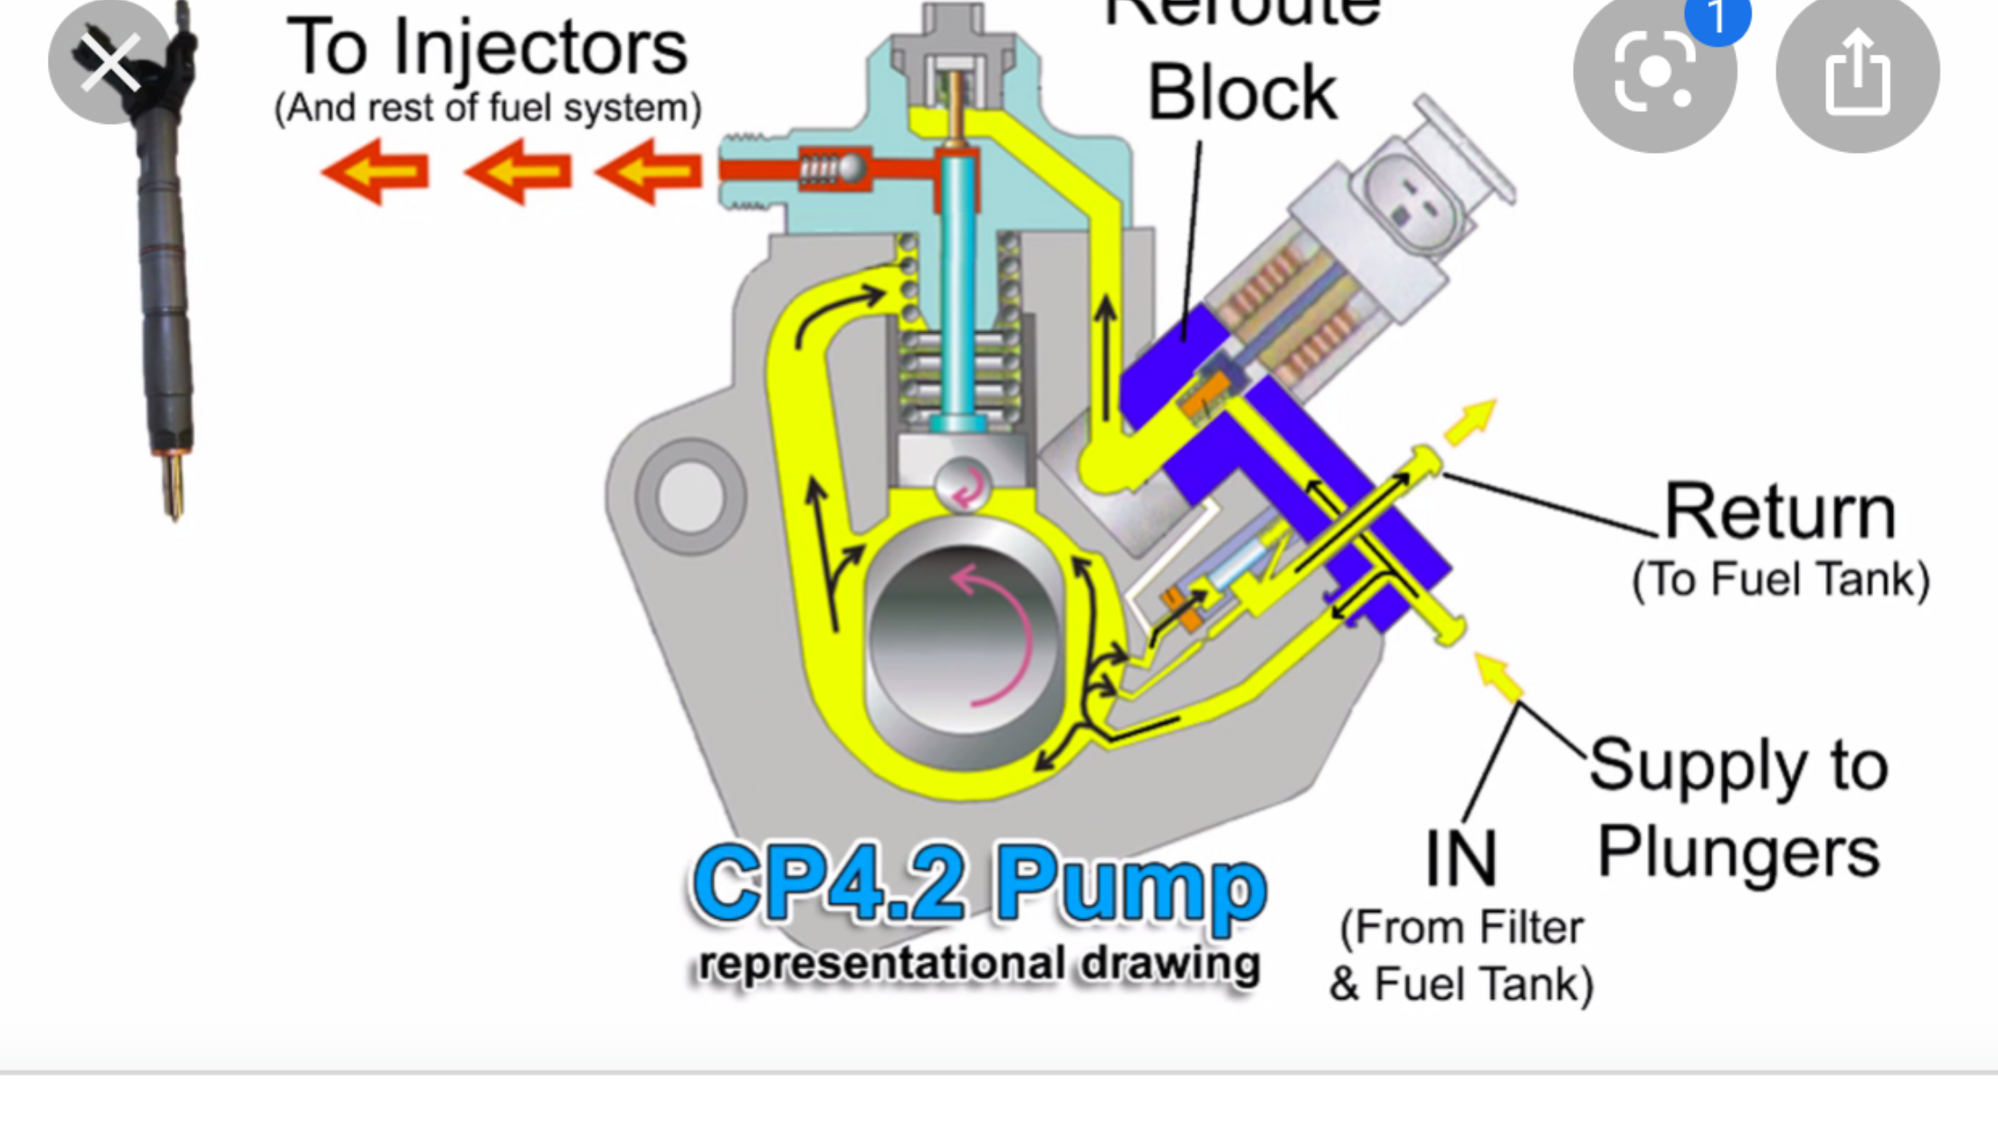  fuel system failure CP4 disaster prevention kit design flaw. - Ford  Truck Enthusiasts Forums